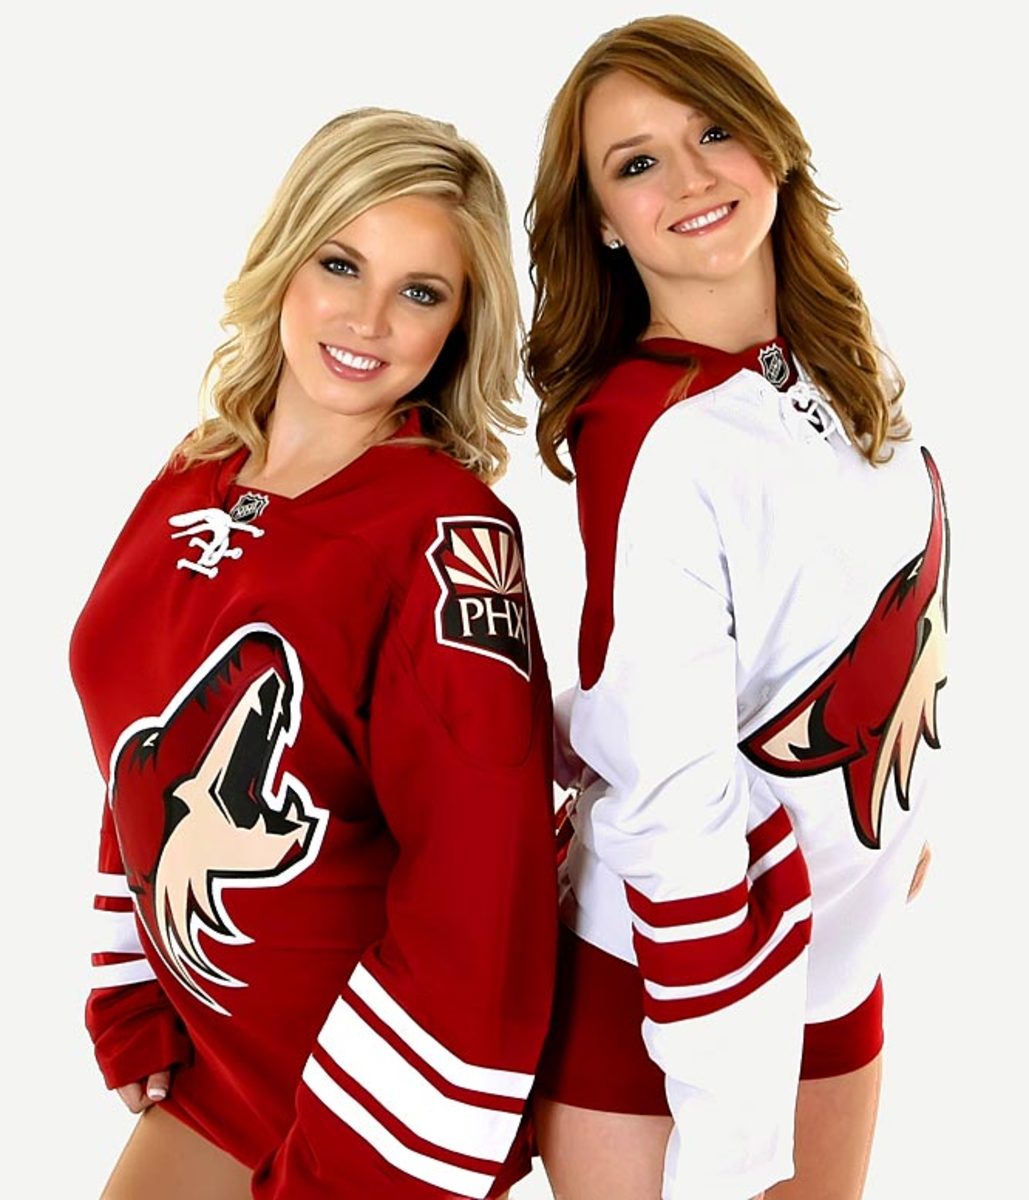 coyotes-the-pack-dancers%2804%29.jpg